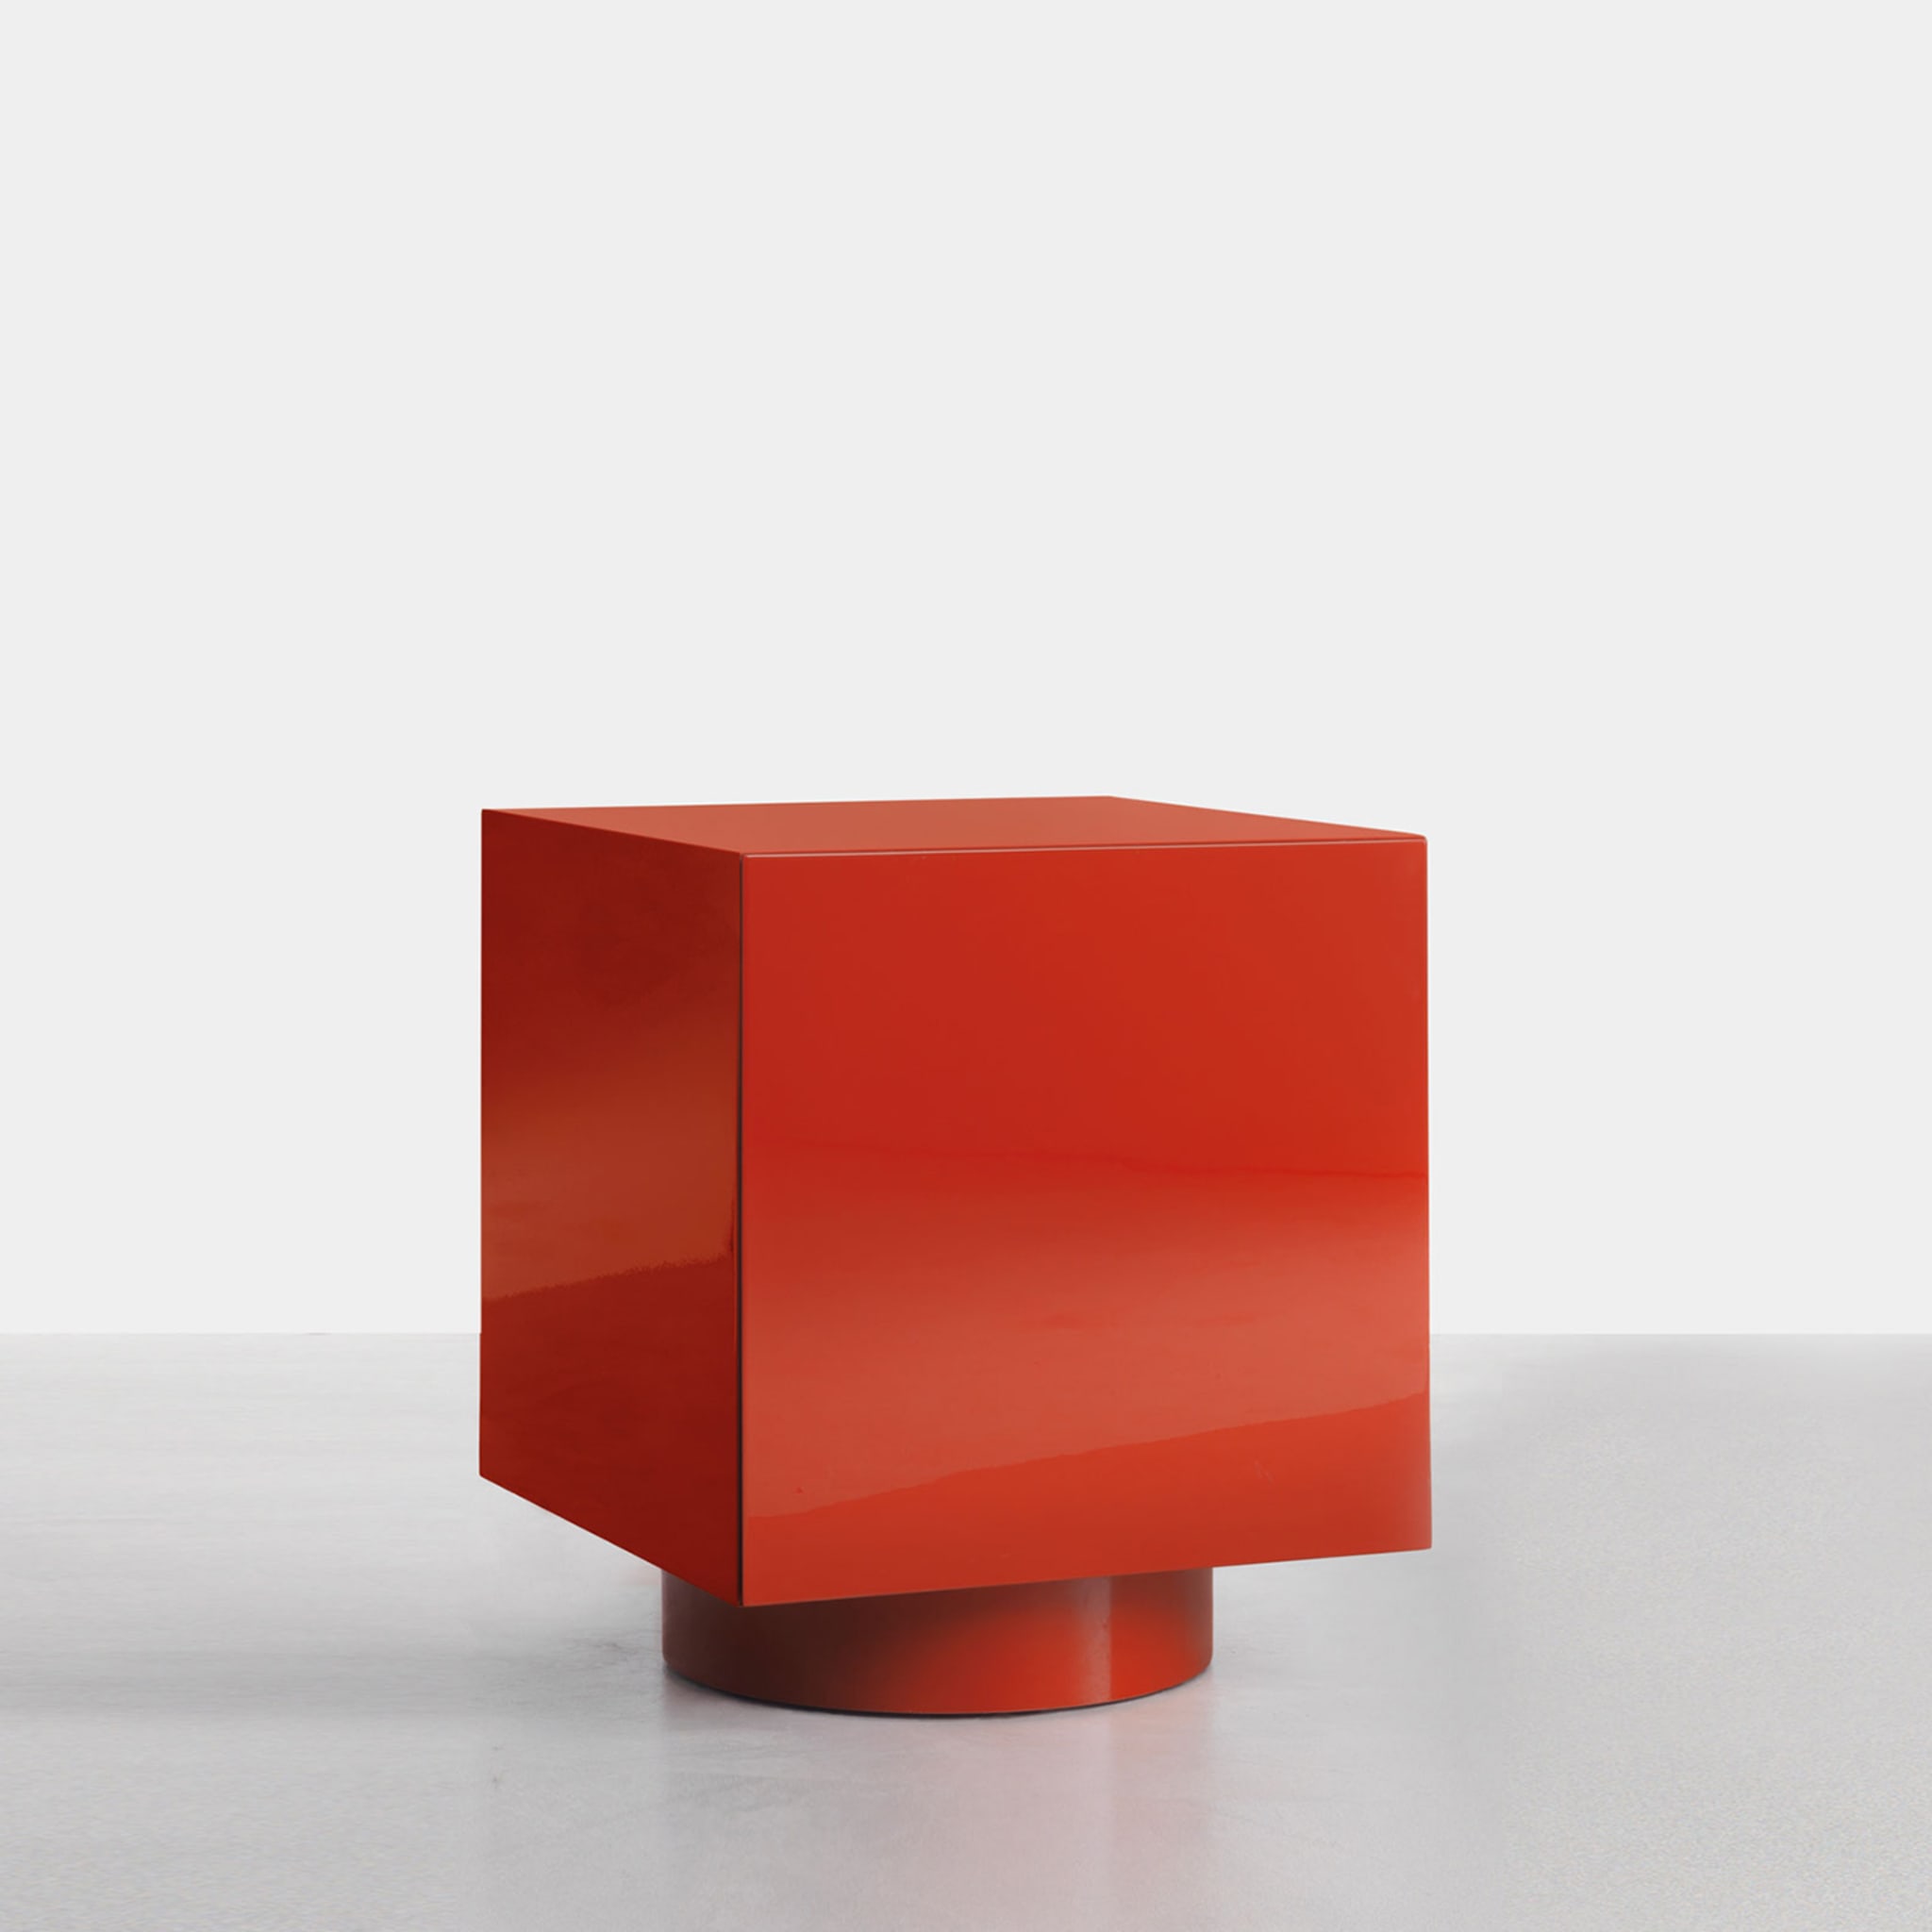 Rubik Red Side Table by Dainelli Studio #2 - Alternative view 1